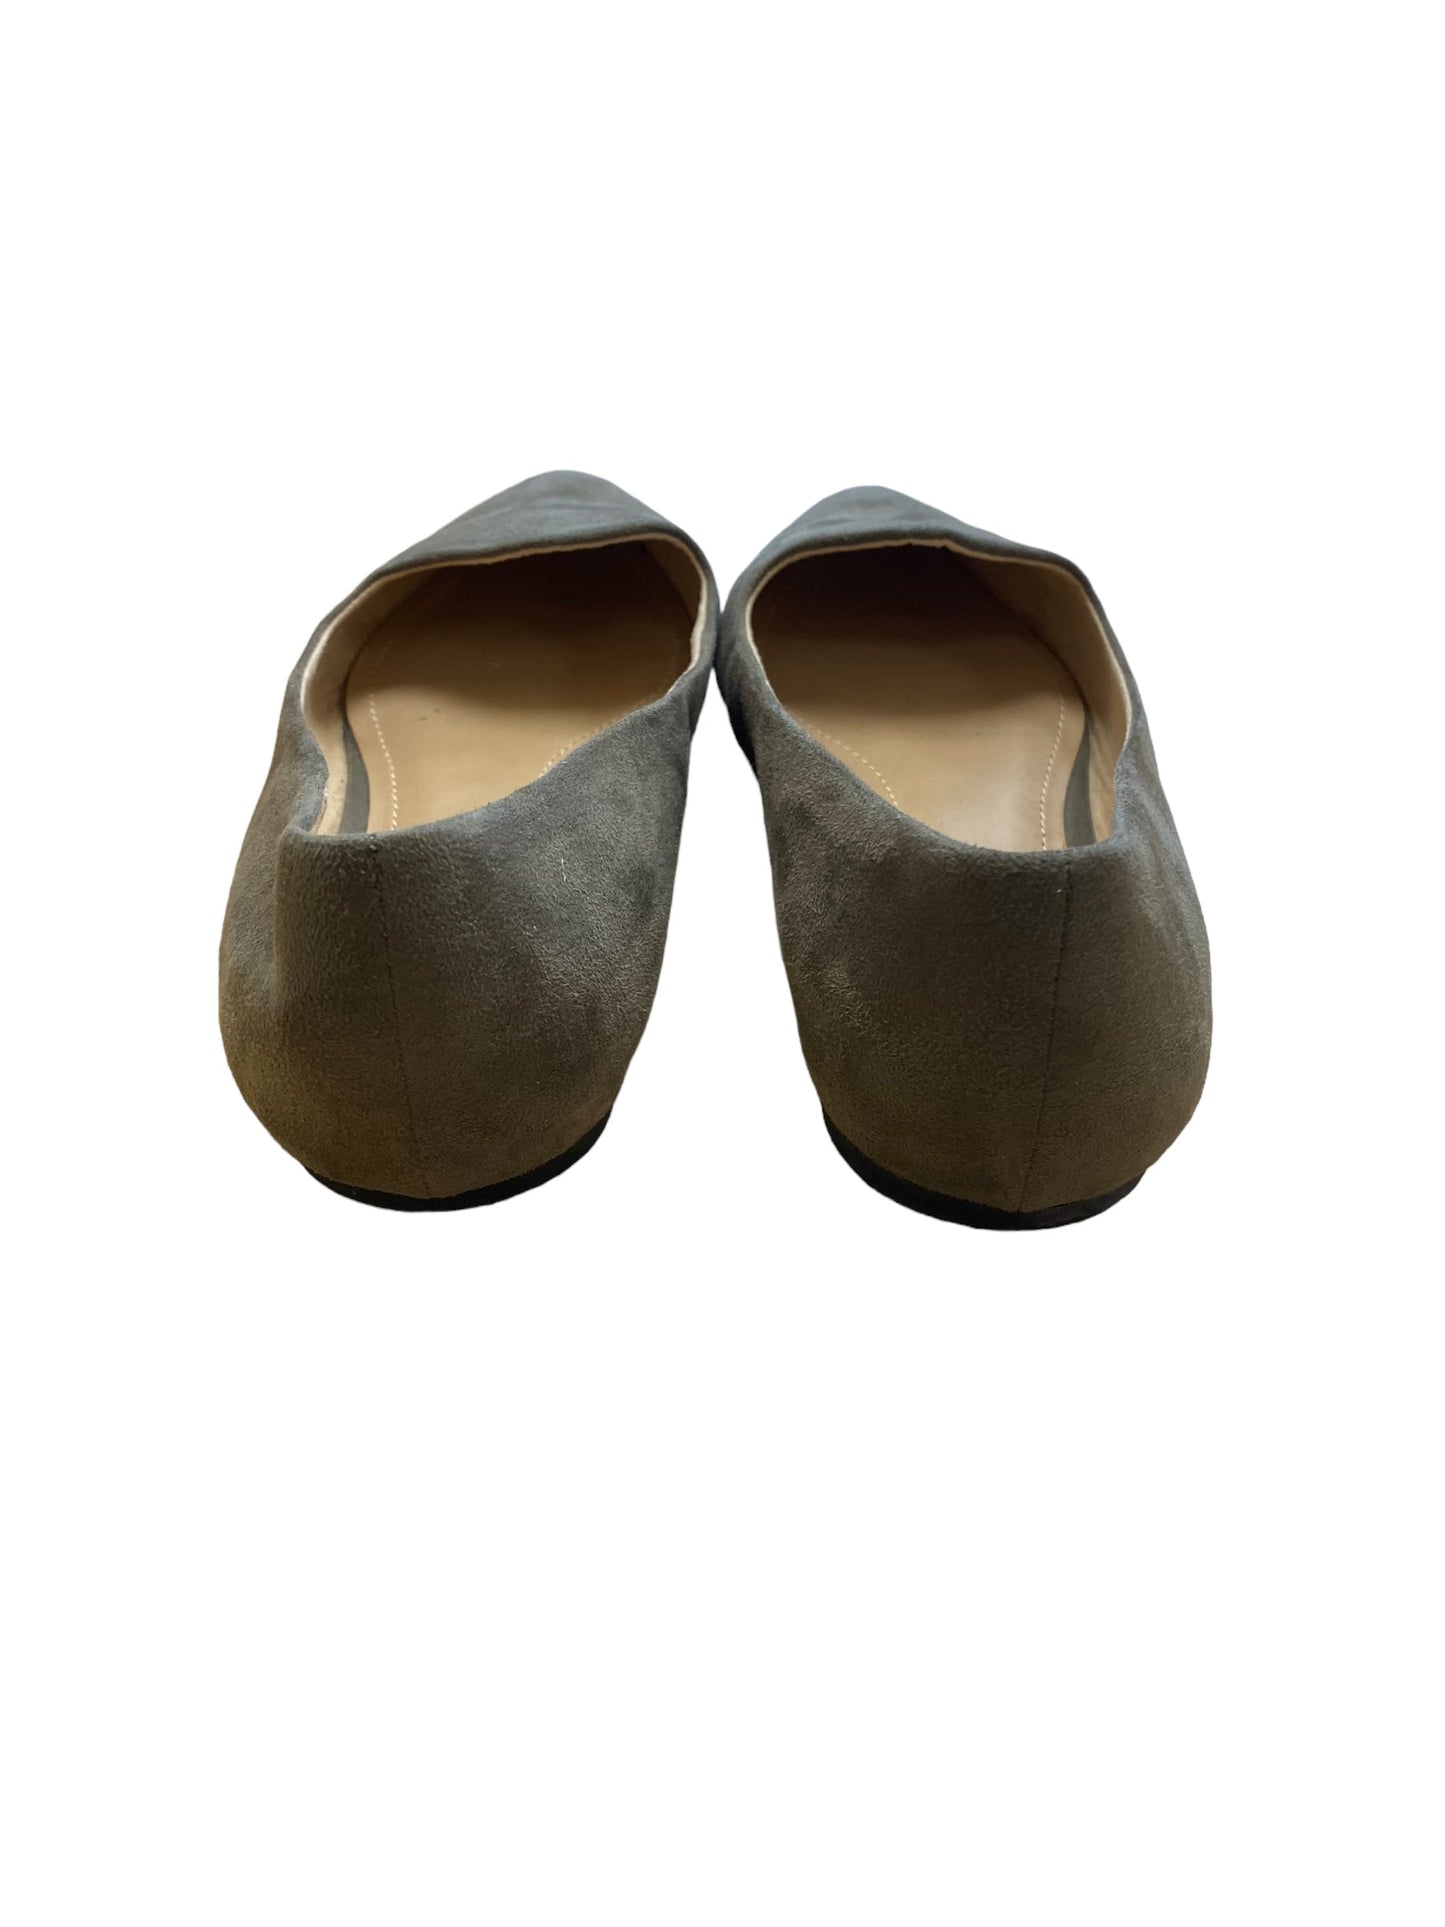 Shoes Flats By Market & Spruce  Size: 8.5